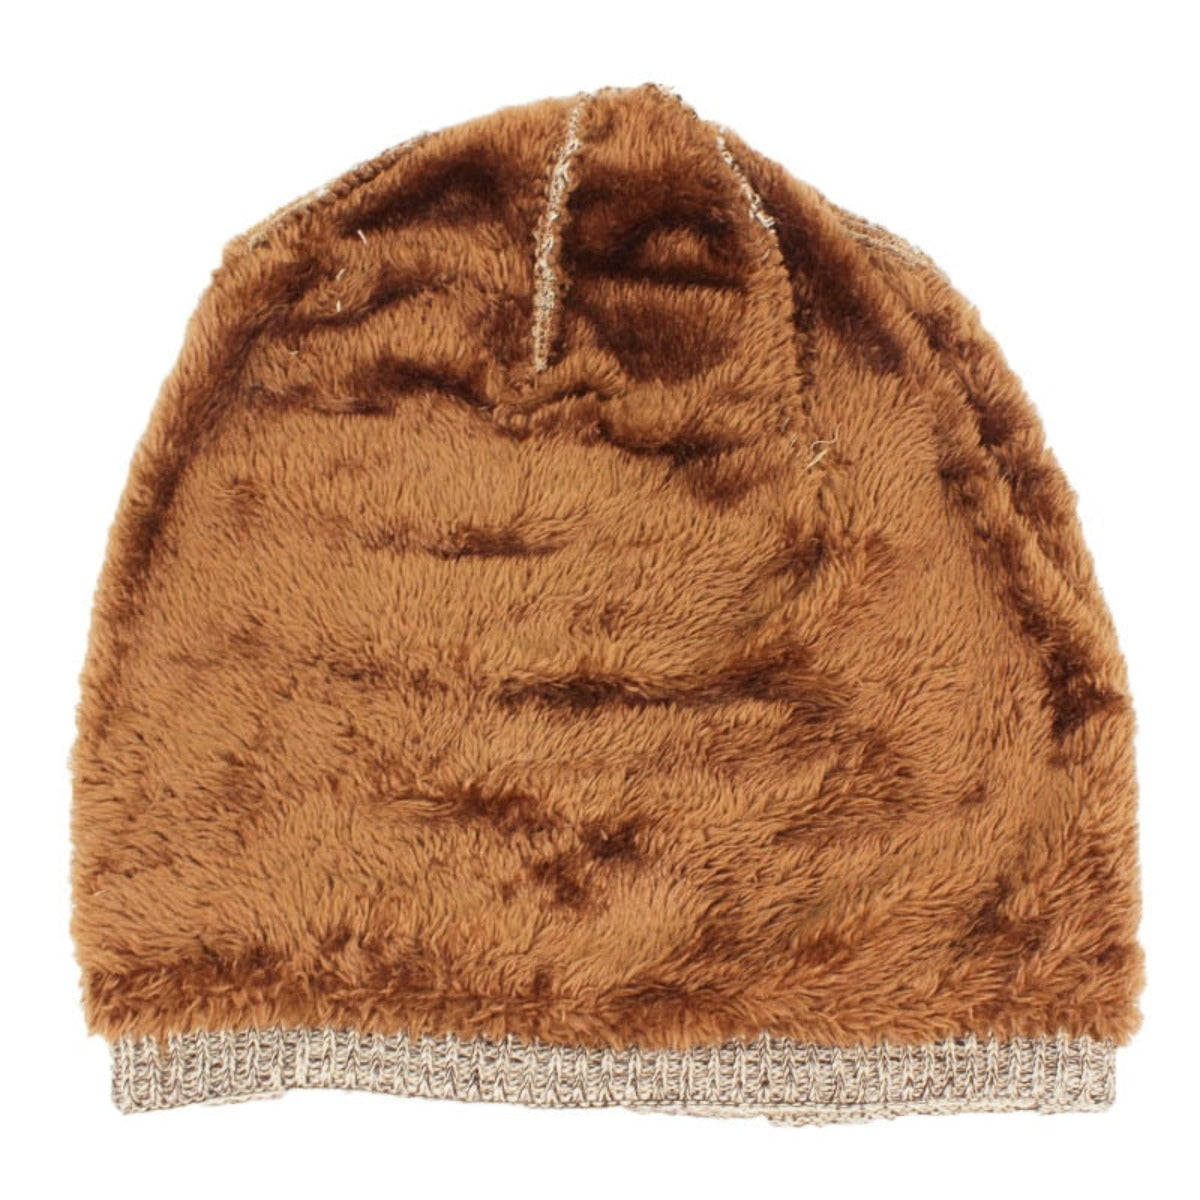 A high-quality Casual Winter Knitted Beanie Hat in brown, perfect for winter, on a white background.